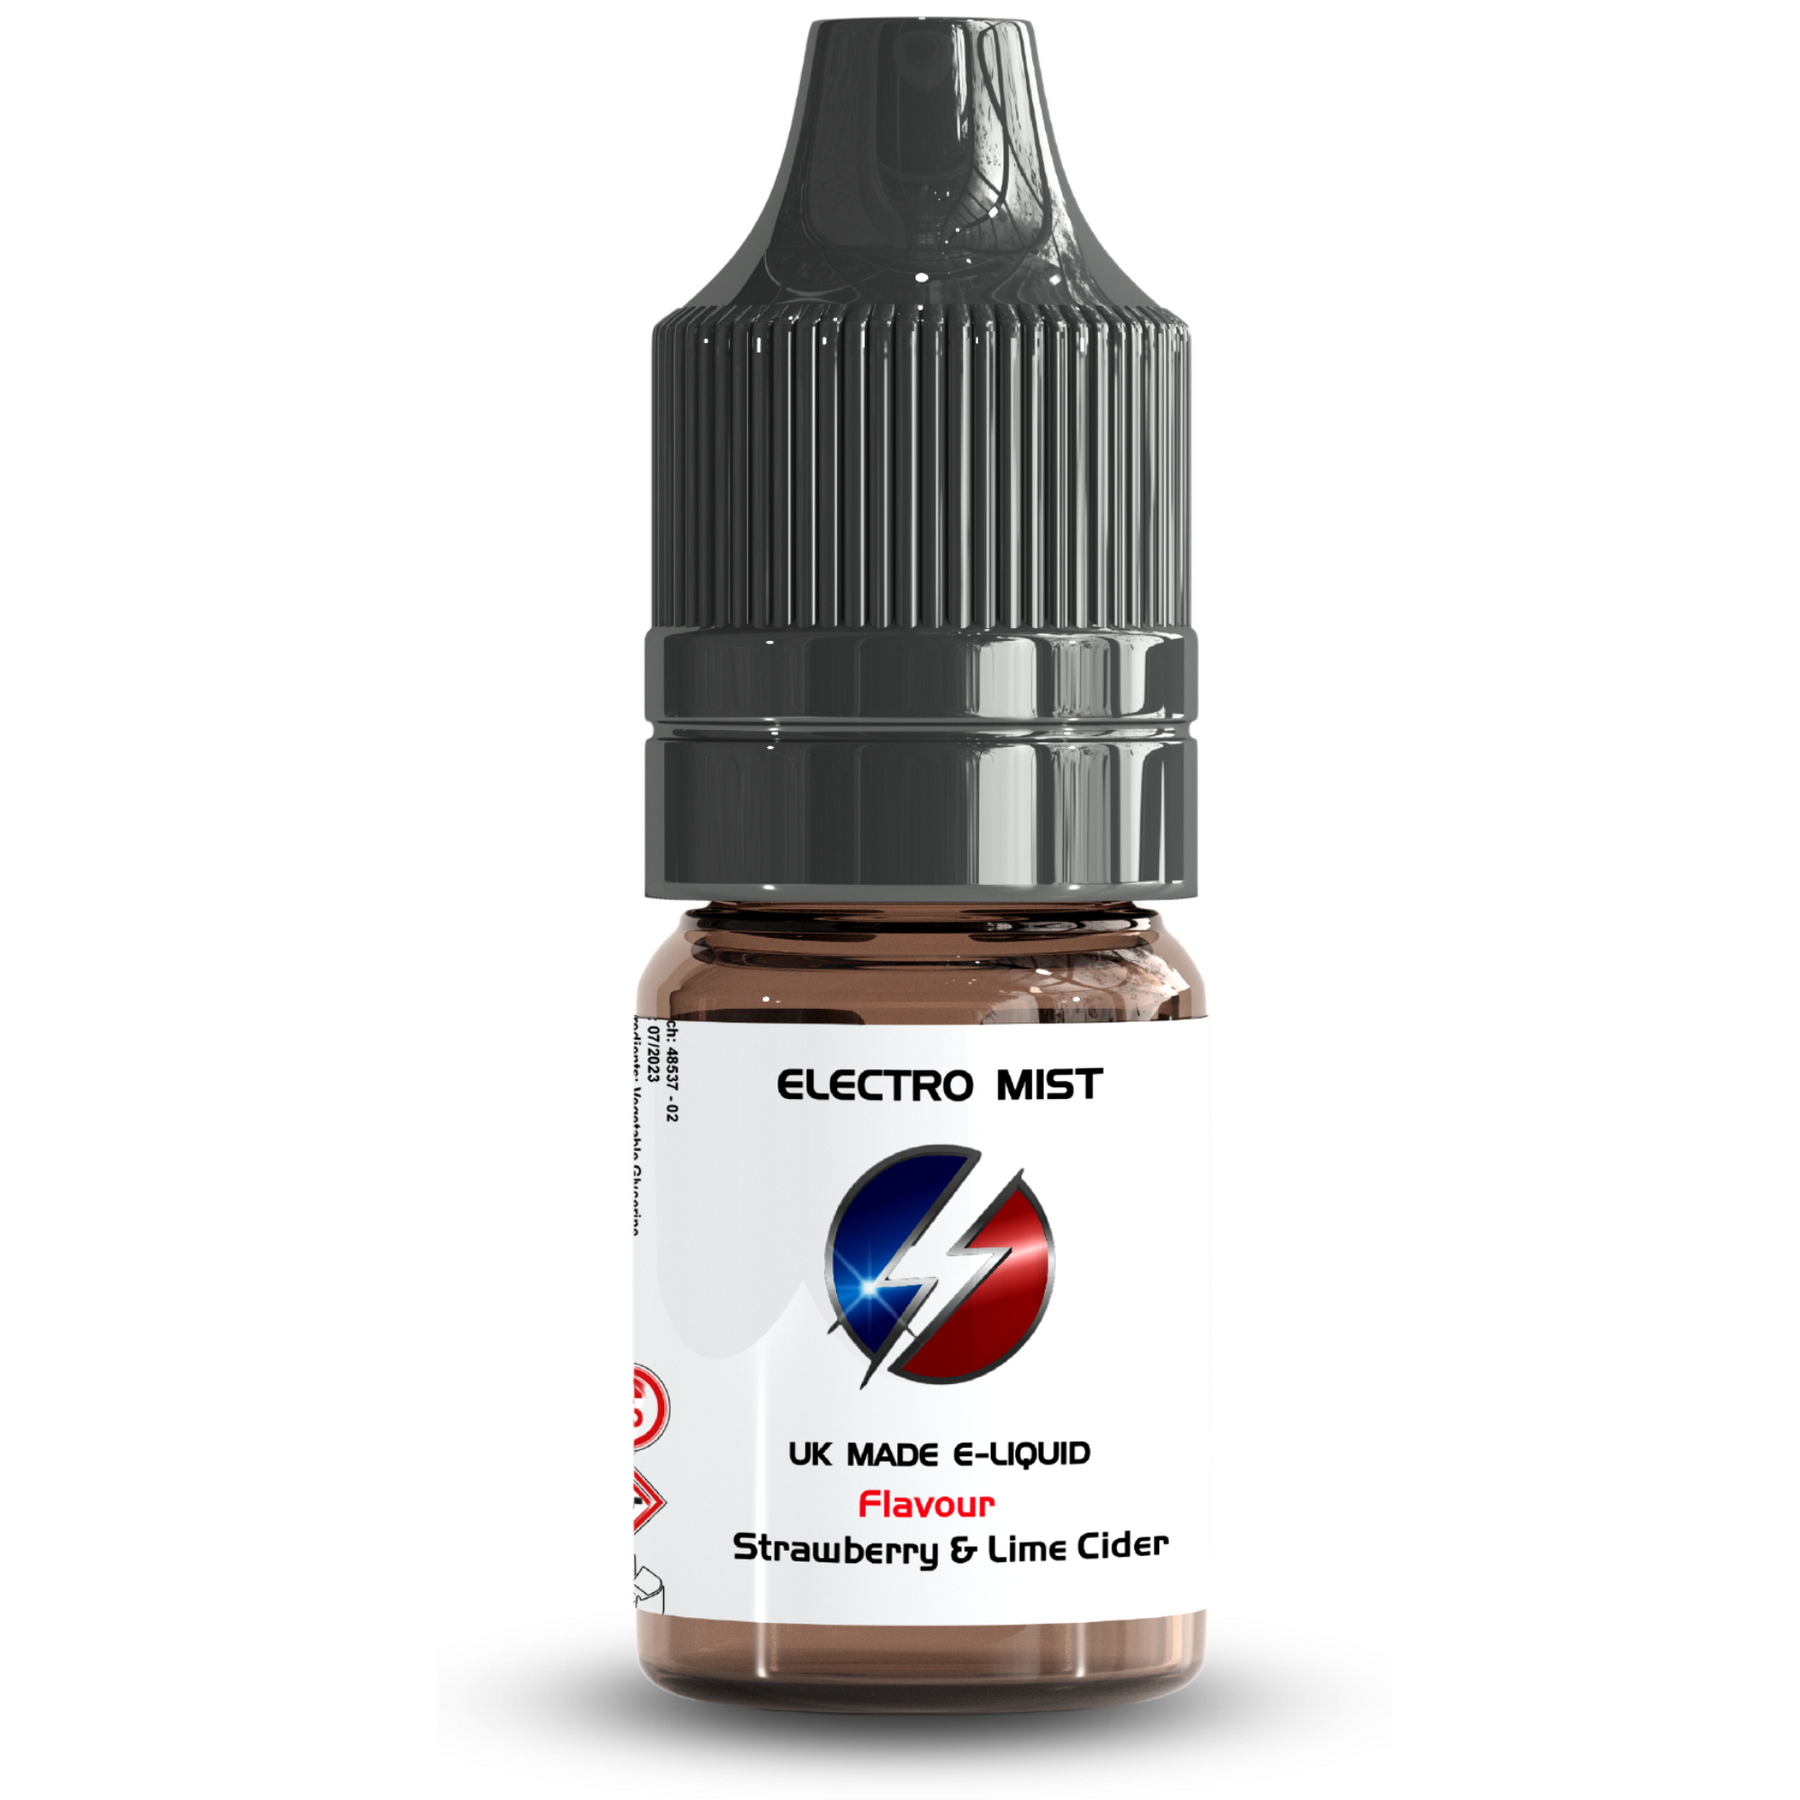 Electromist, the e-liquid brand you can trust. Get your taste buds ready for a flavour sensation, Strawberry & Lime Cider. Nicotine Content: 3mg/6mg/12mg. Products may contain nicotine. For over 18s Only ejuice, vape pen, eliquid, e cigarette, 10ml, vaping, cloud, PG, VG, 60/40, vape liquid, Flavour